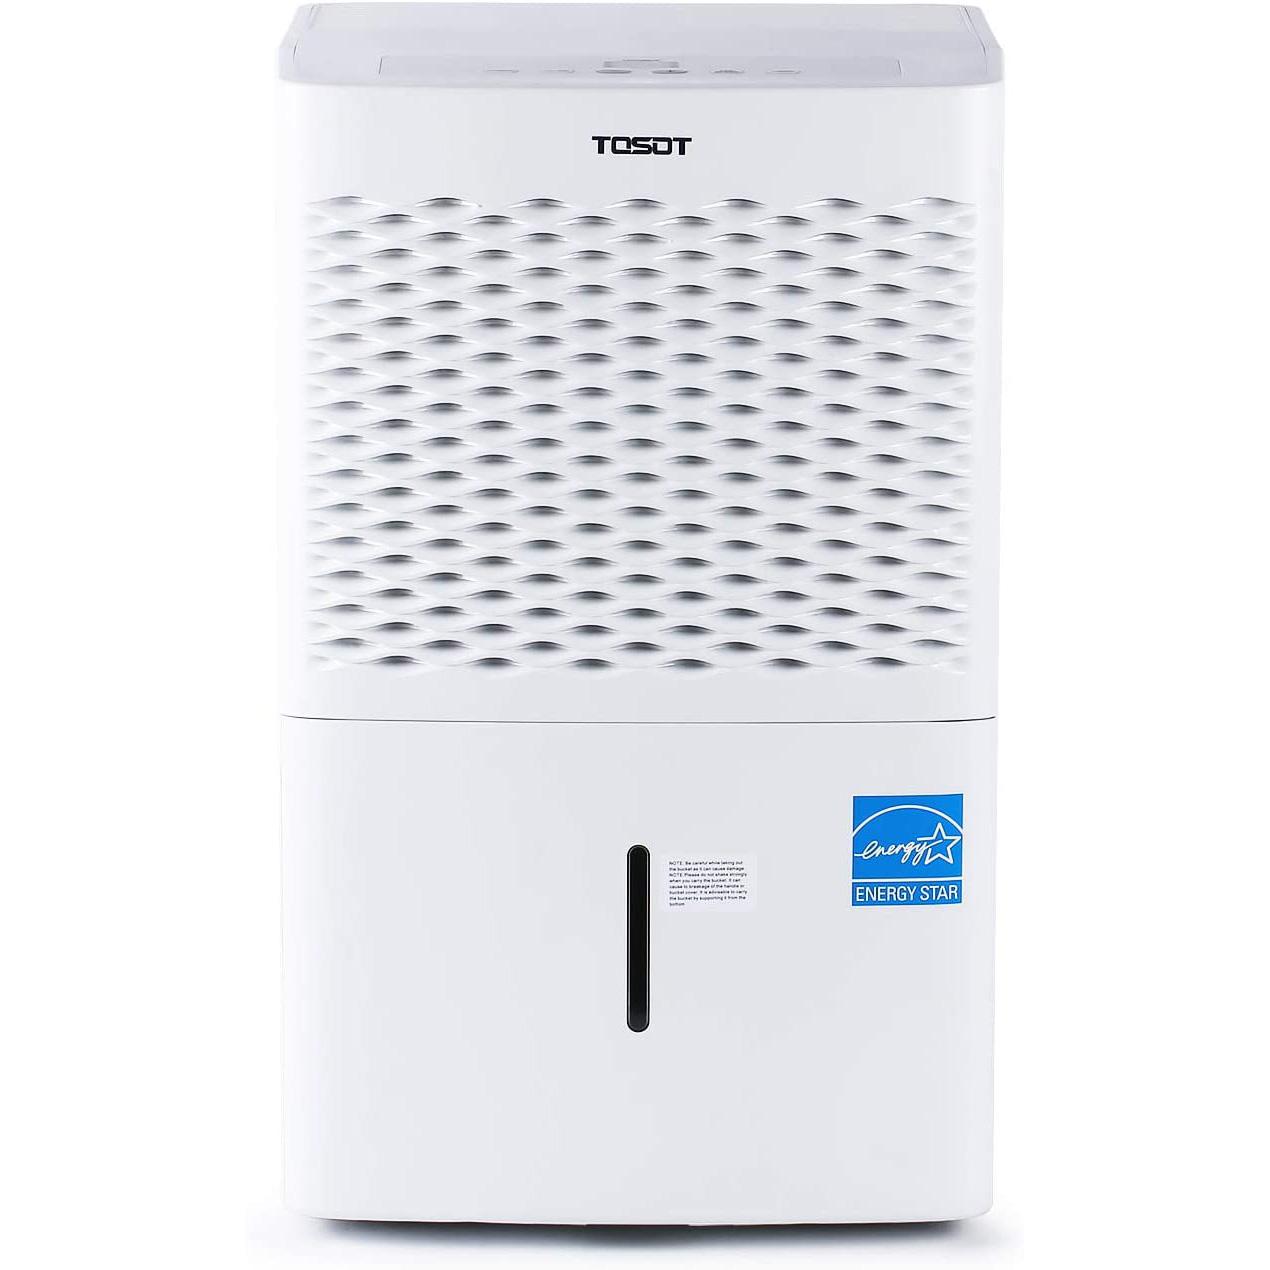 Tosot 4500SqFt Energy Star Dehumidifier for $174.99 Shipped